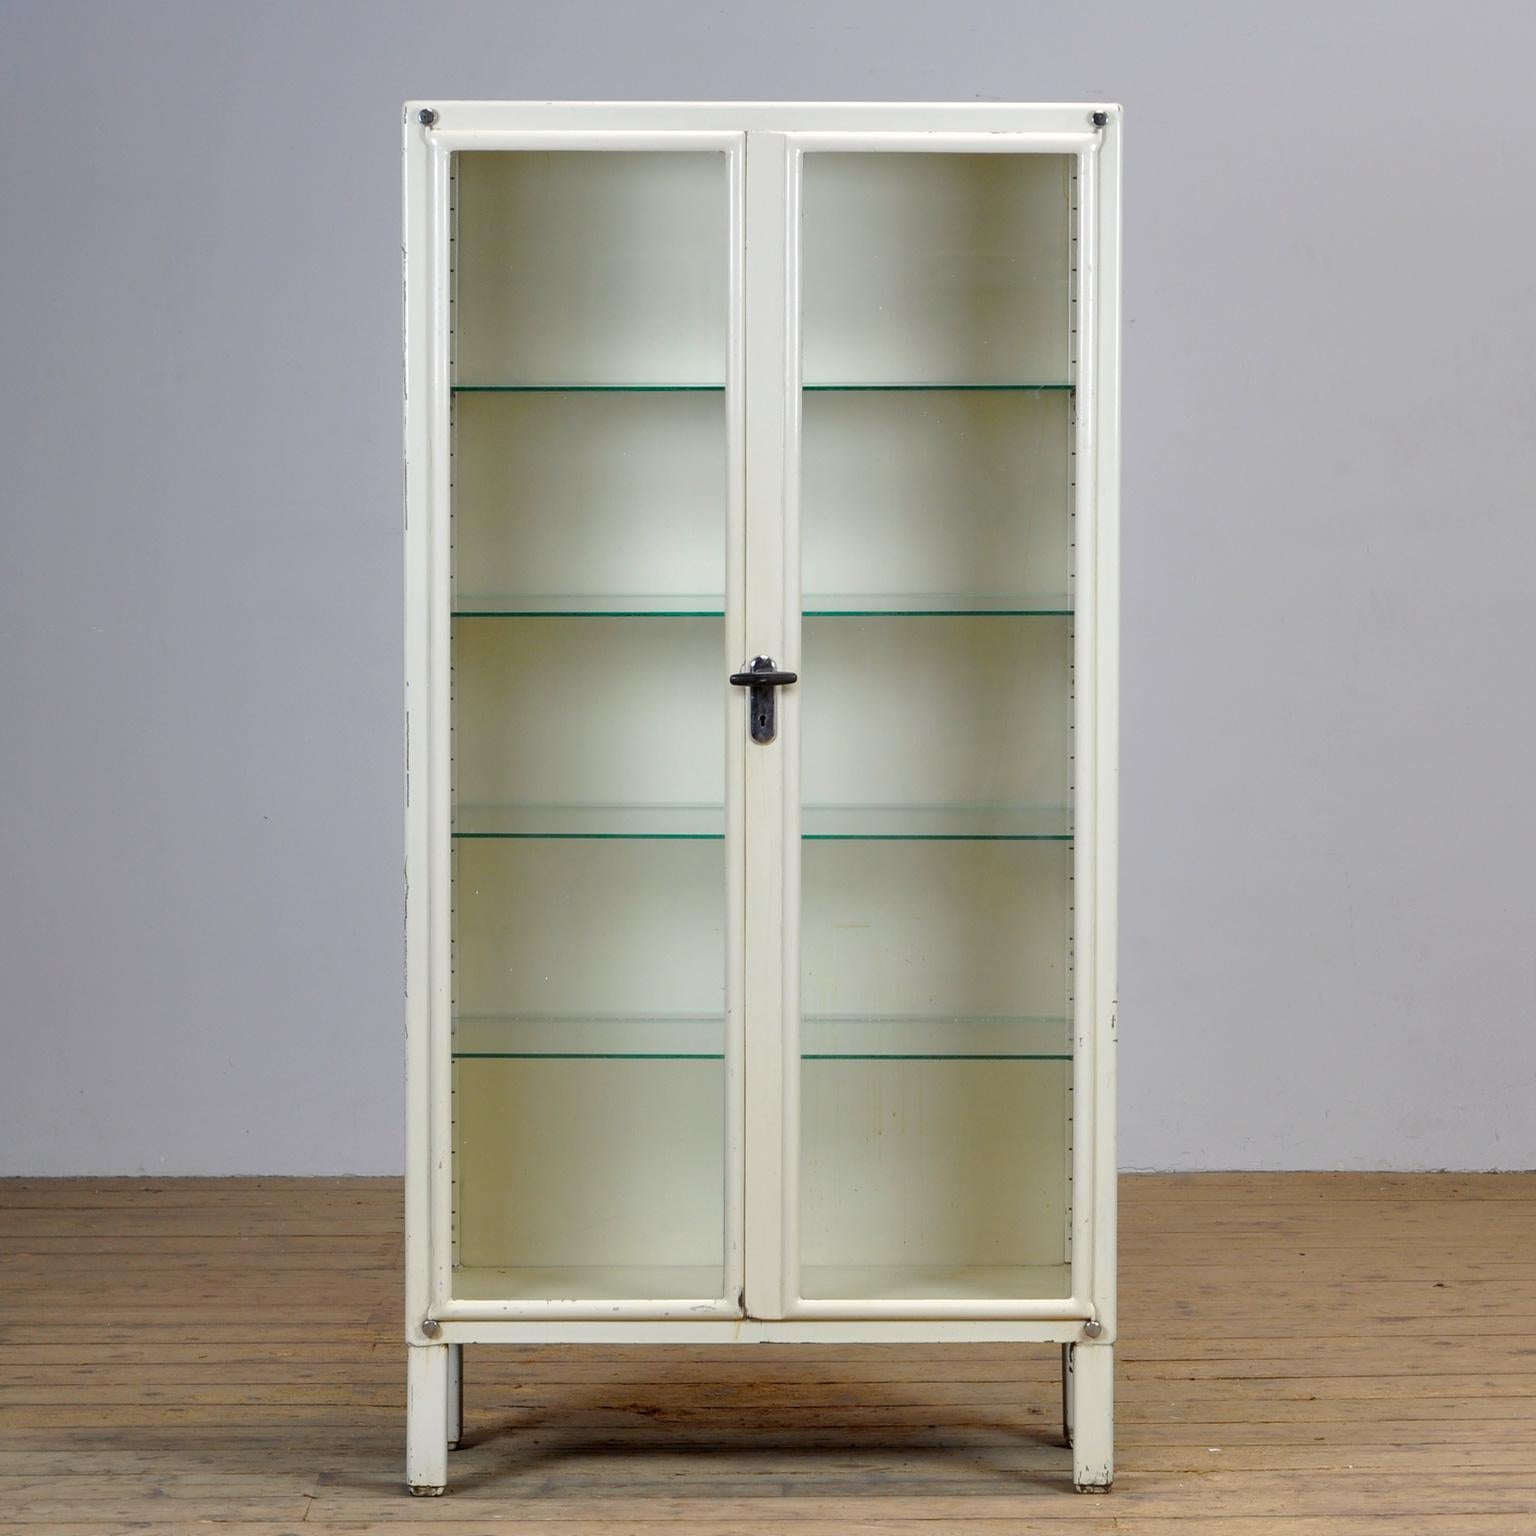 Medical cabinet from Czechoslovakia, produced by Kovona circa 1950. With four new adjustable glass shelves.